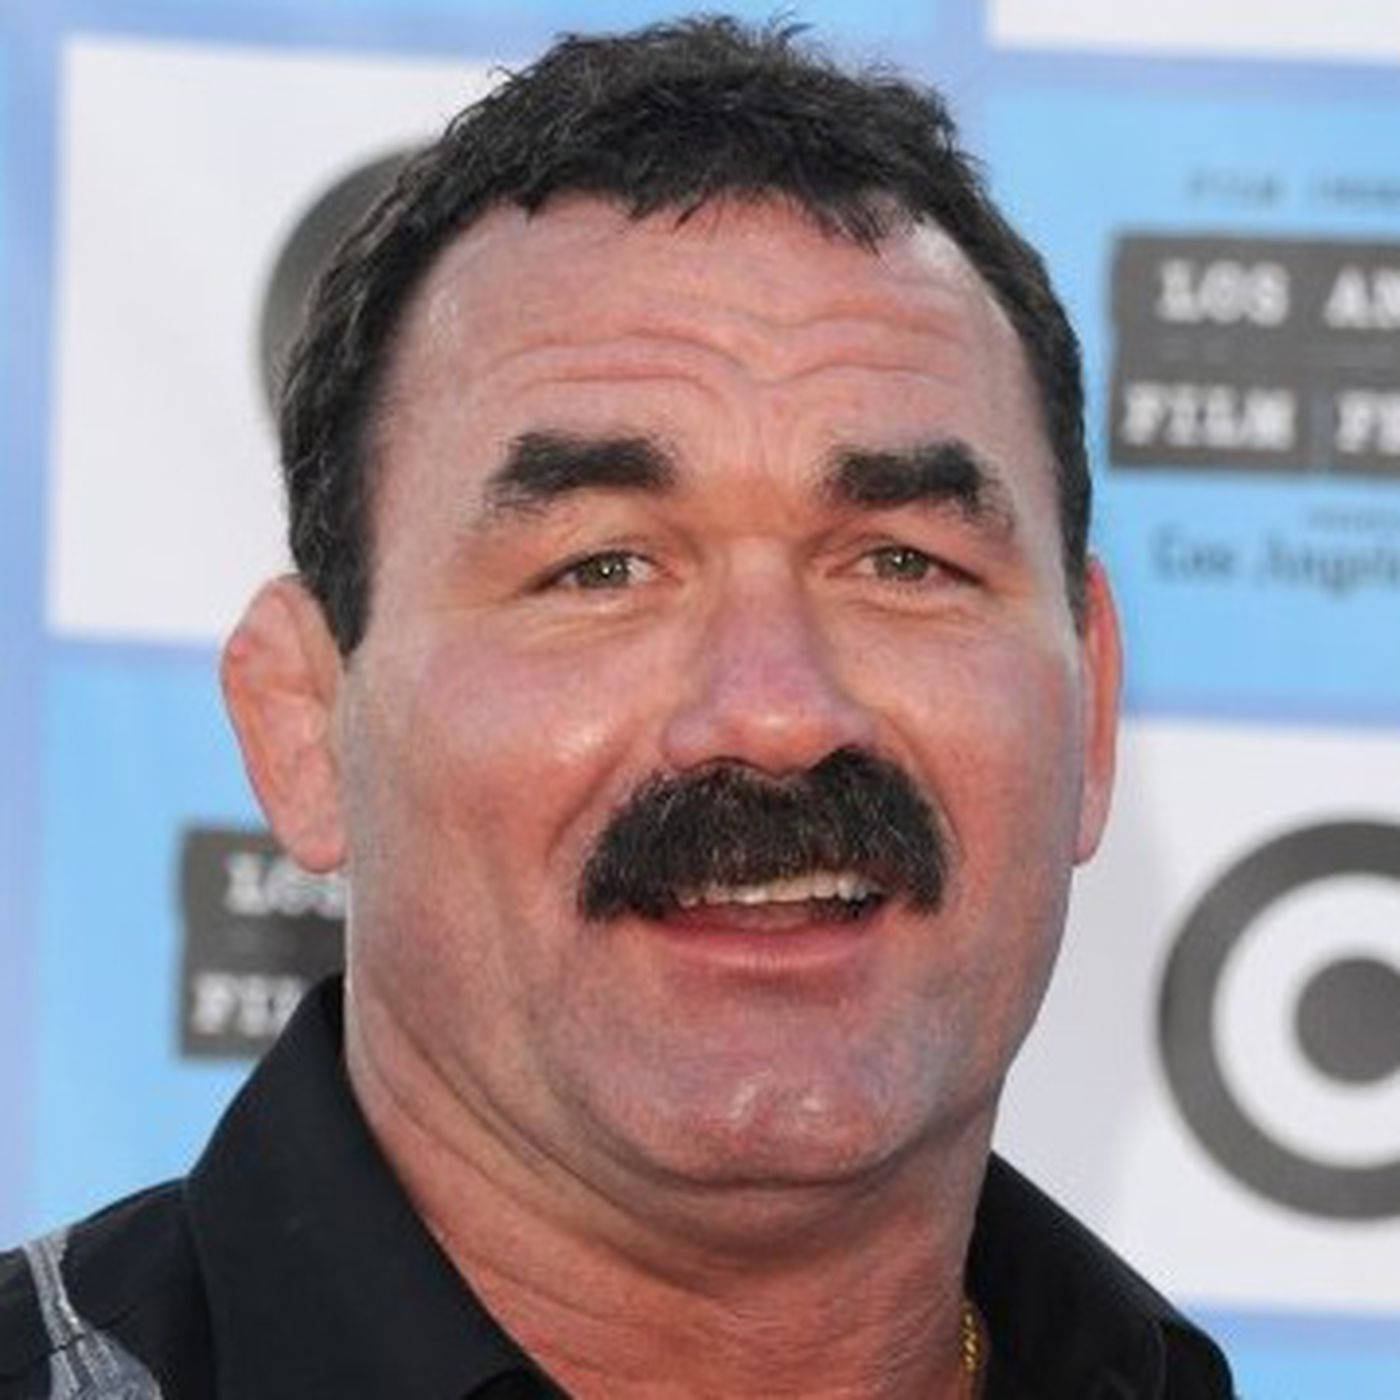 Don Frye With Open-Mouth Smile Wallpaper